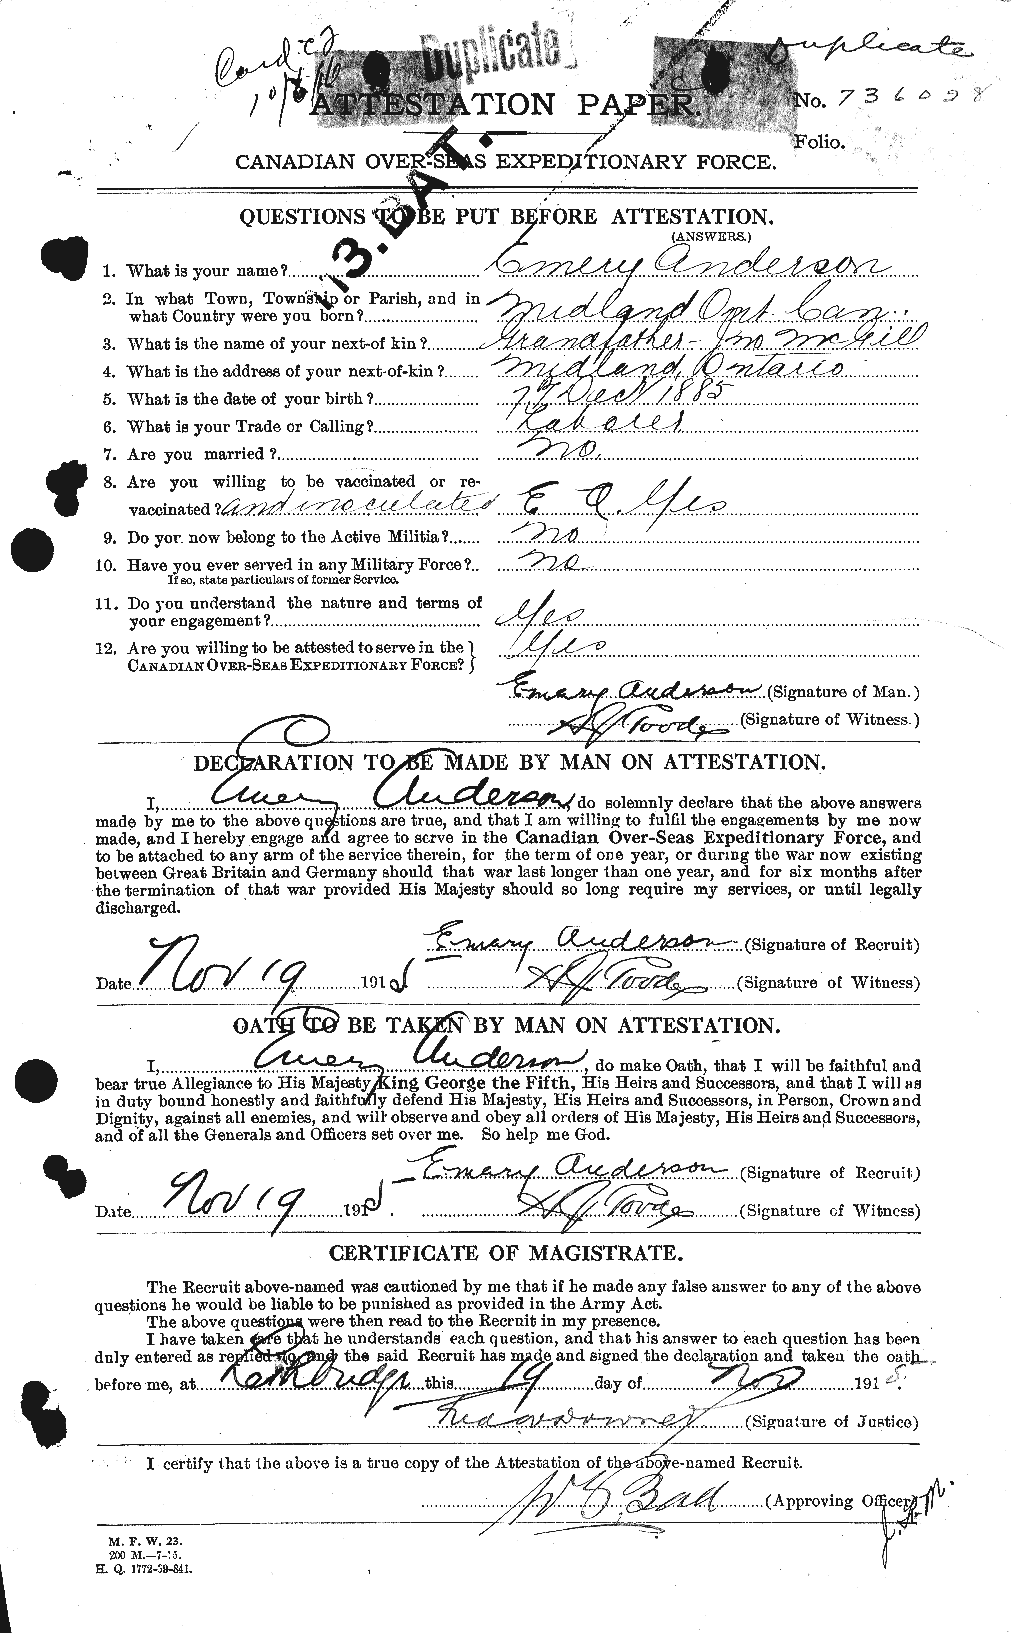 Personnel Records of the First World War - CEF 209910a